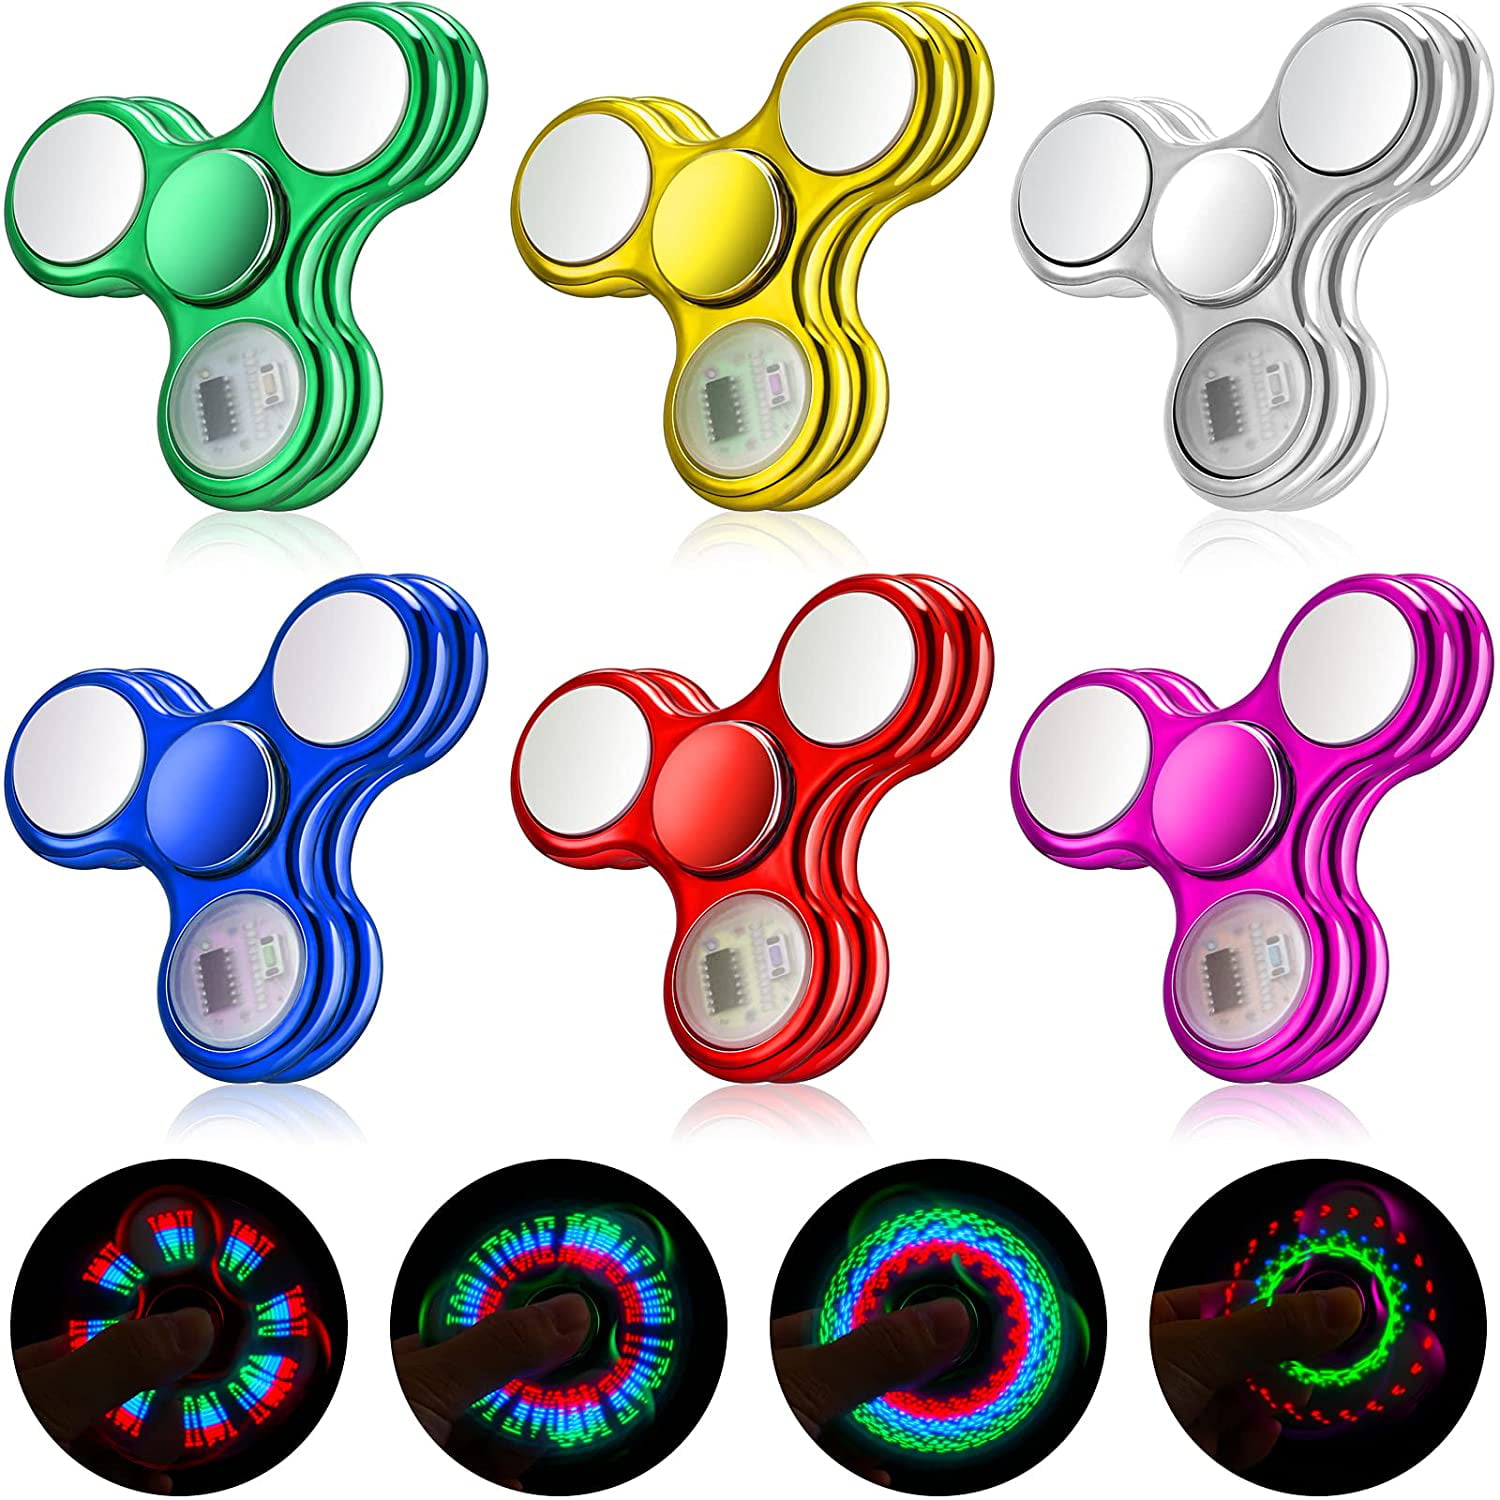 Led Metallic Silver Metal Hand Spinner Fidget Toy Anxiety Stress Relief. 